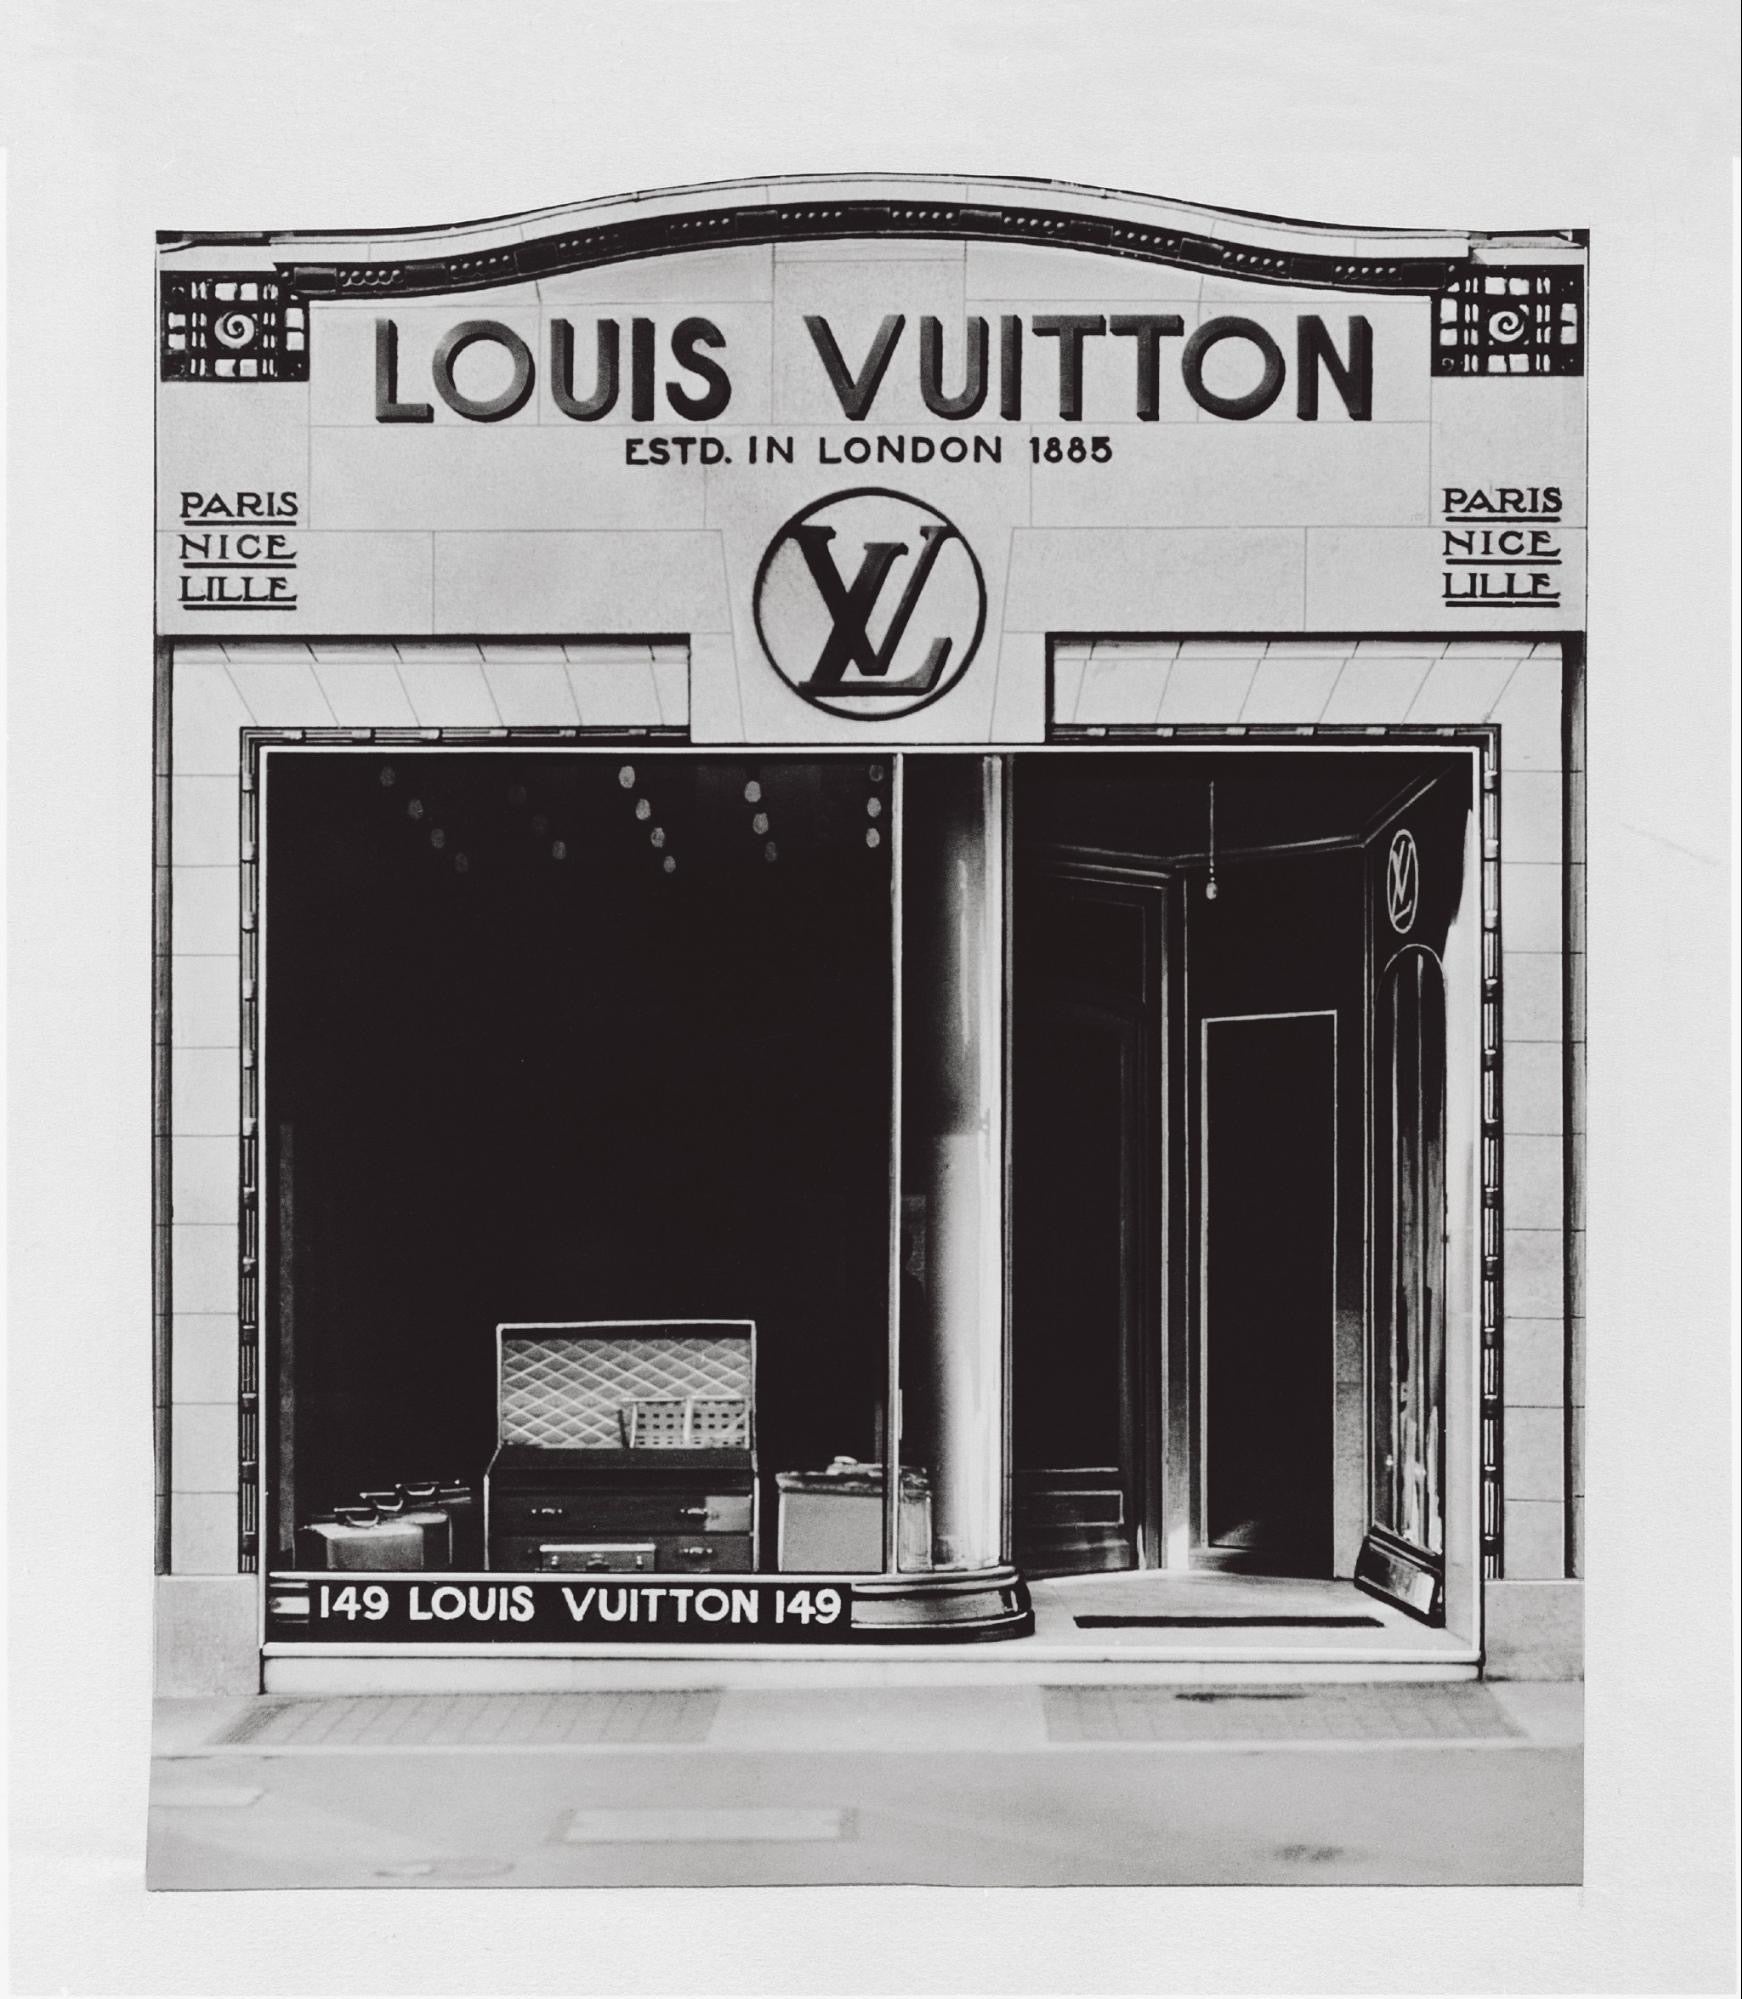 Louis Vuitton History Of The Brand